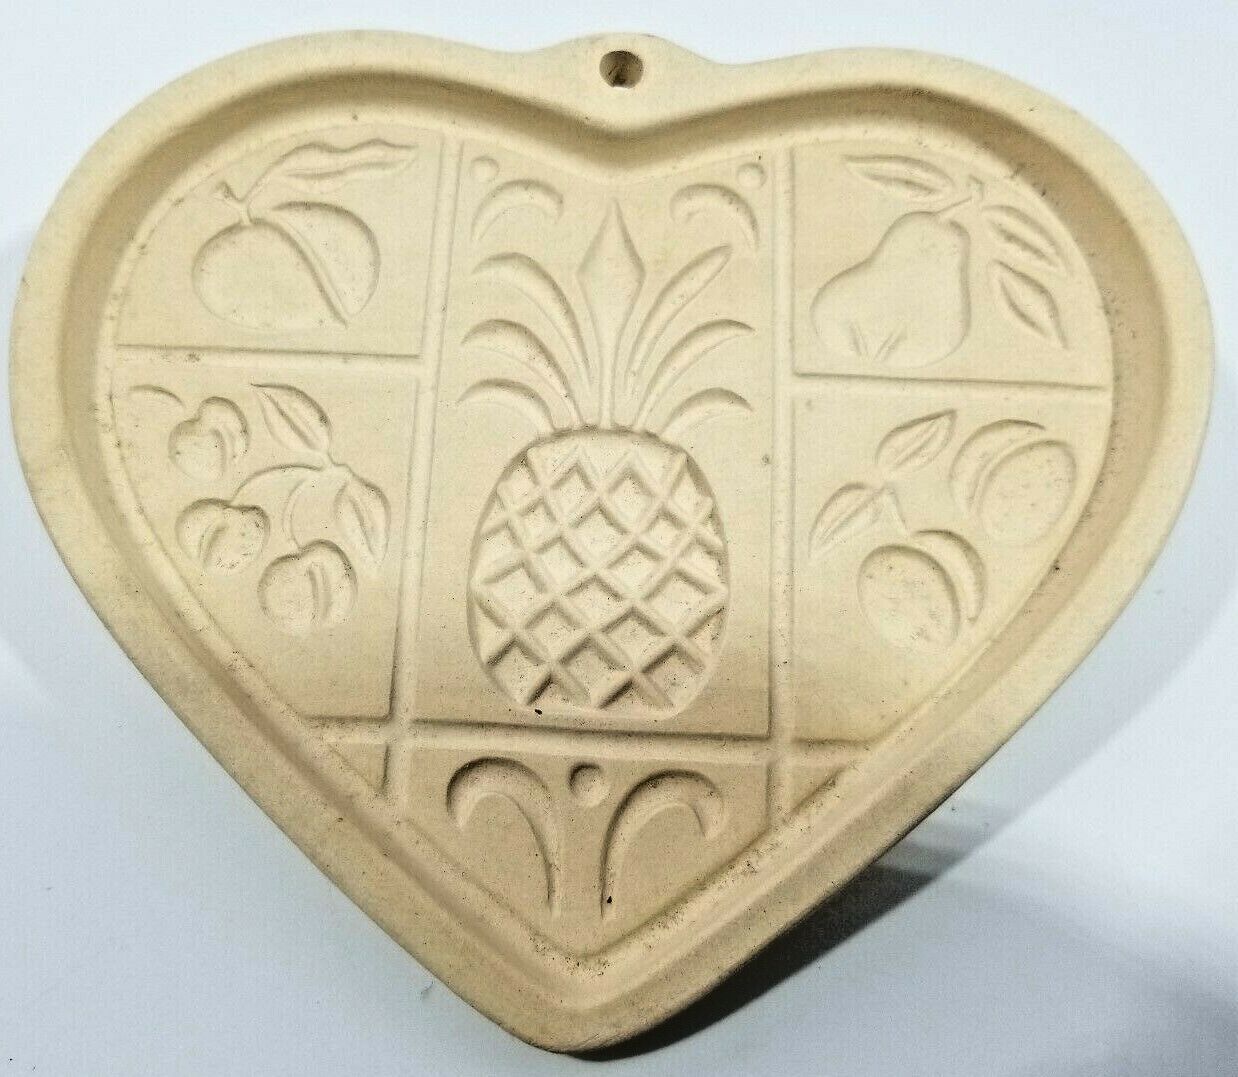 PAMPERED CHEF 2001 Stoneware Hospitality Heart Cookie Mold, Family Heritage USA